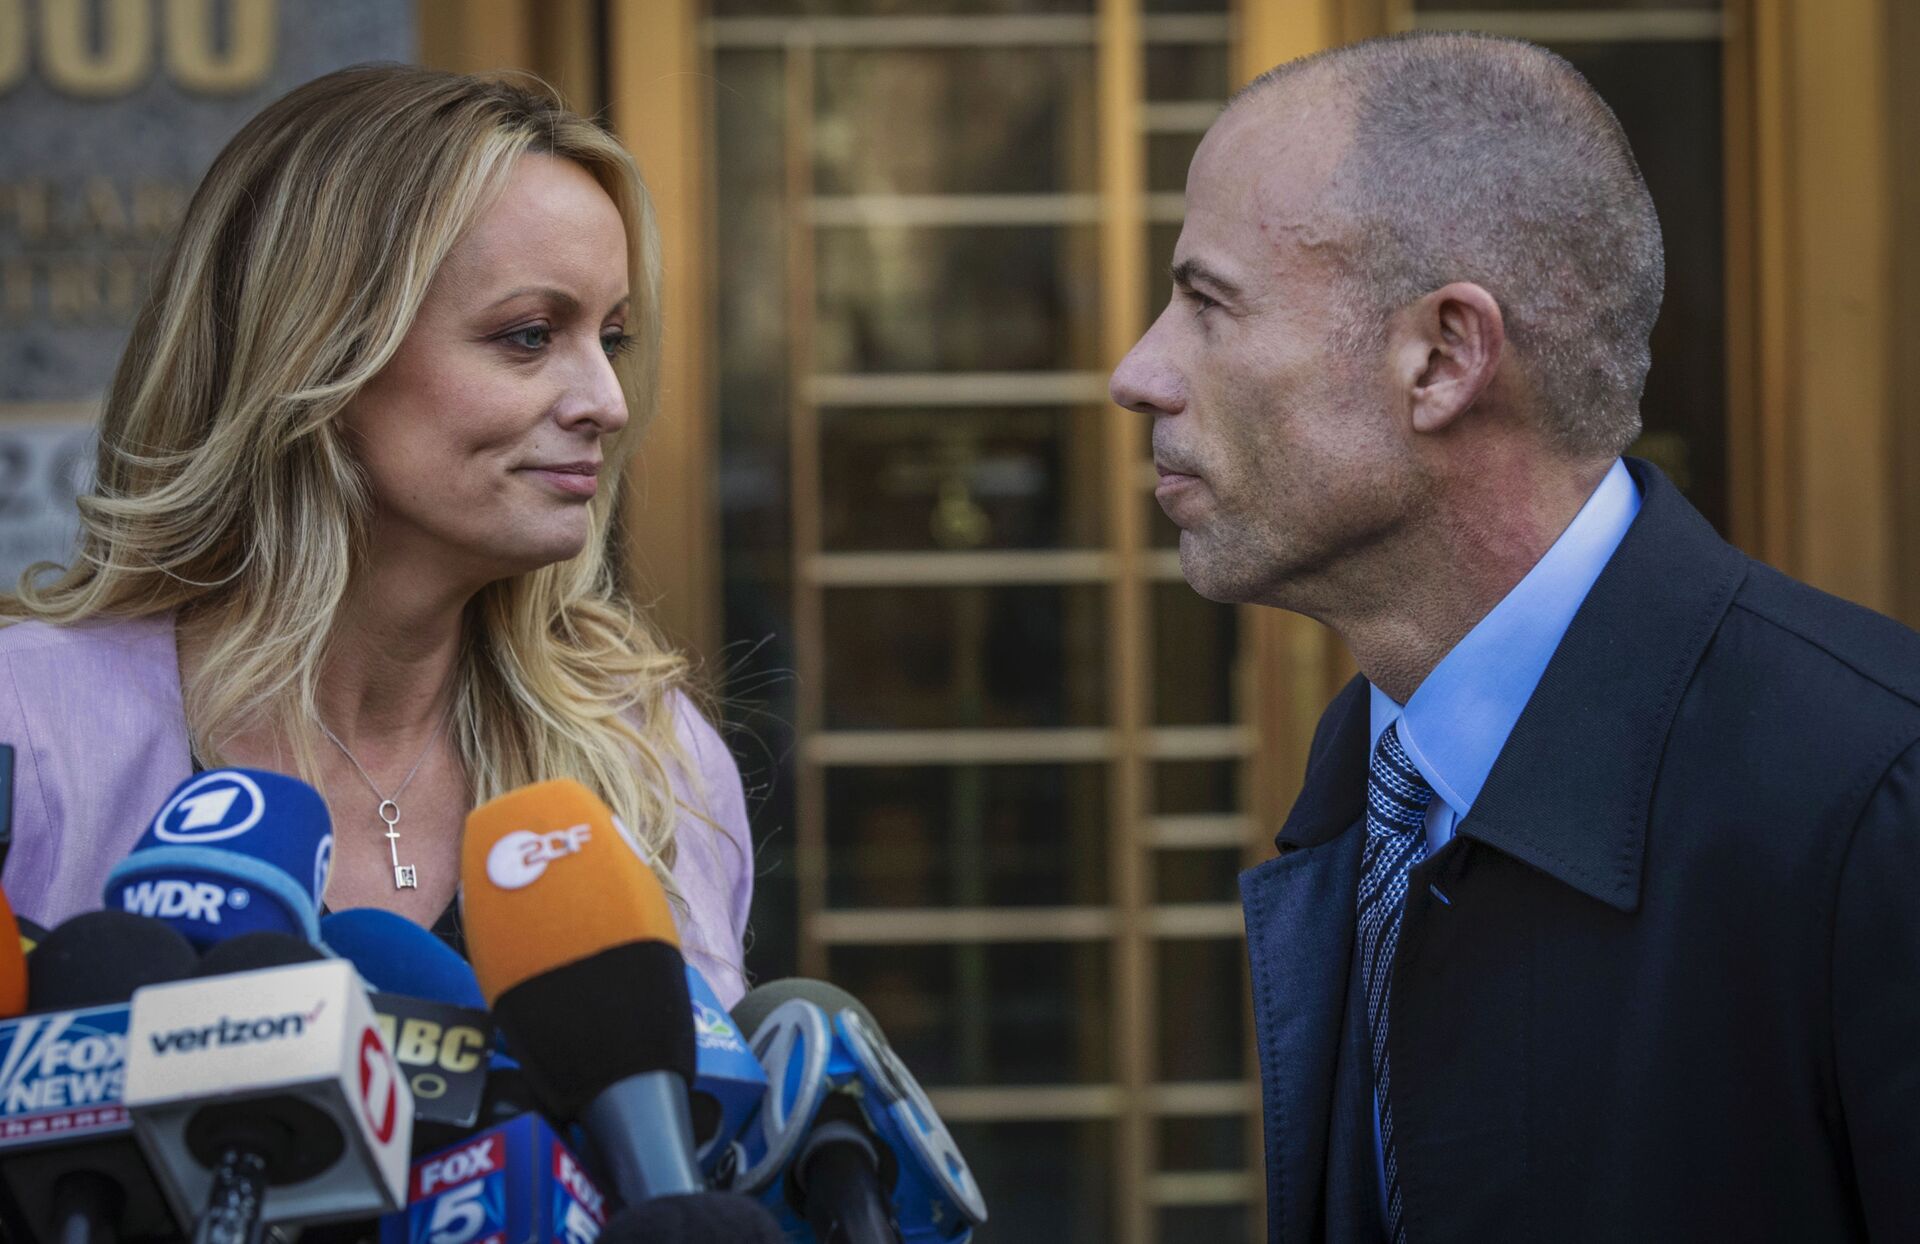 In this April 16, 2018, file photo, adult film actress Stormy Daniels, left, stands with her then lawyer, Michael Avenatti, during a press conference outside federal court in New York. A trial for Avenatti to face charges that he cheated ex-client Daniels out of proceeds from her book was delayed Friday, Jan. 8, 2021, until next year - Sputnik International, 1920, 07.09.2021